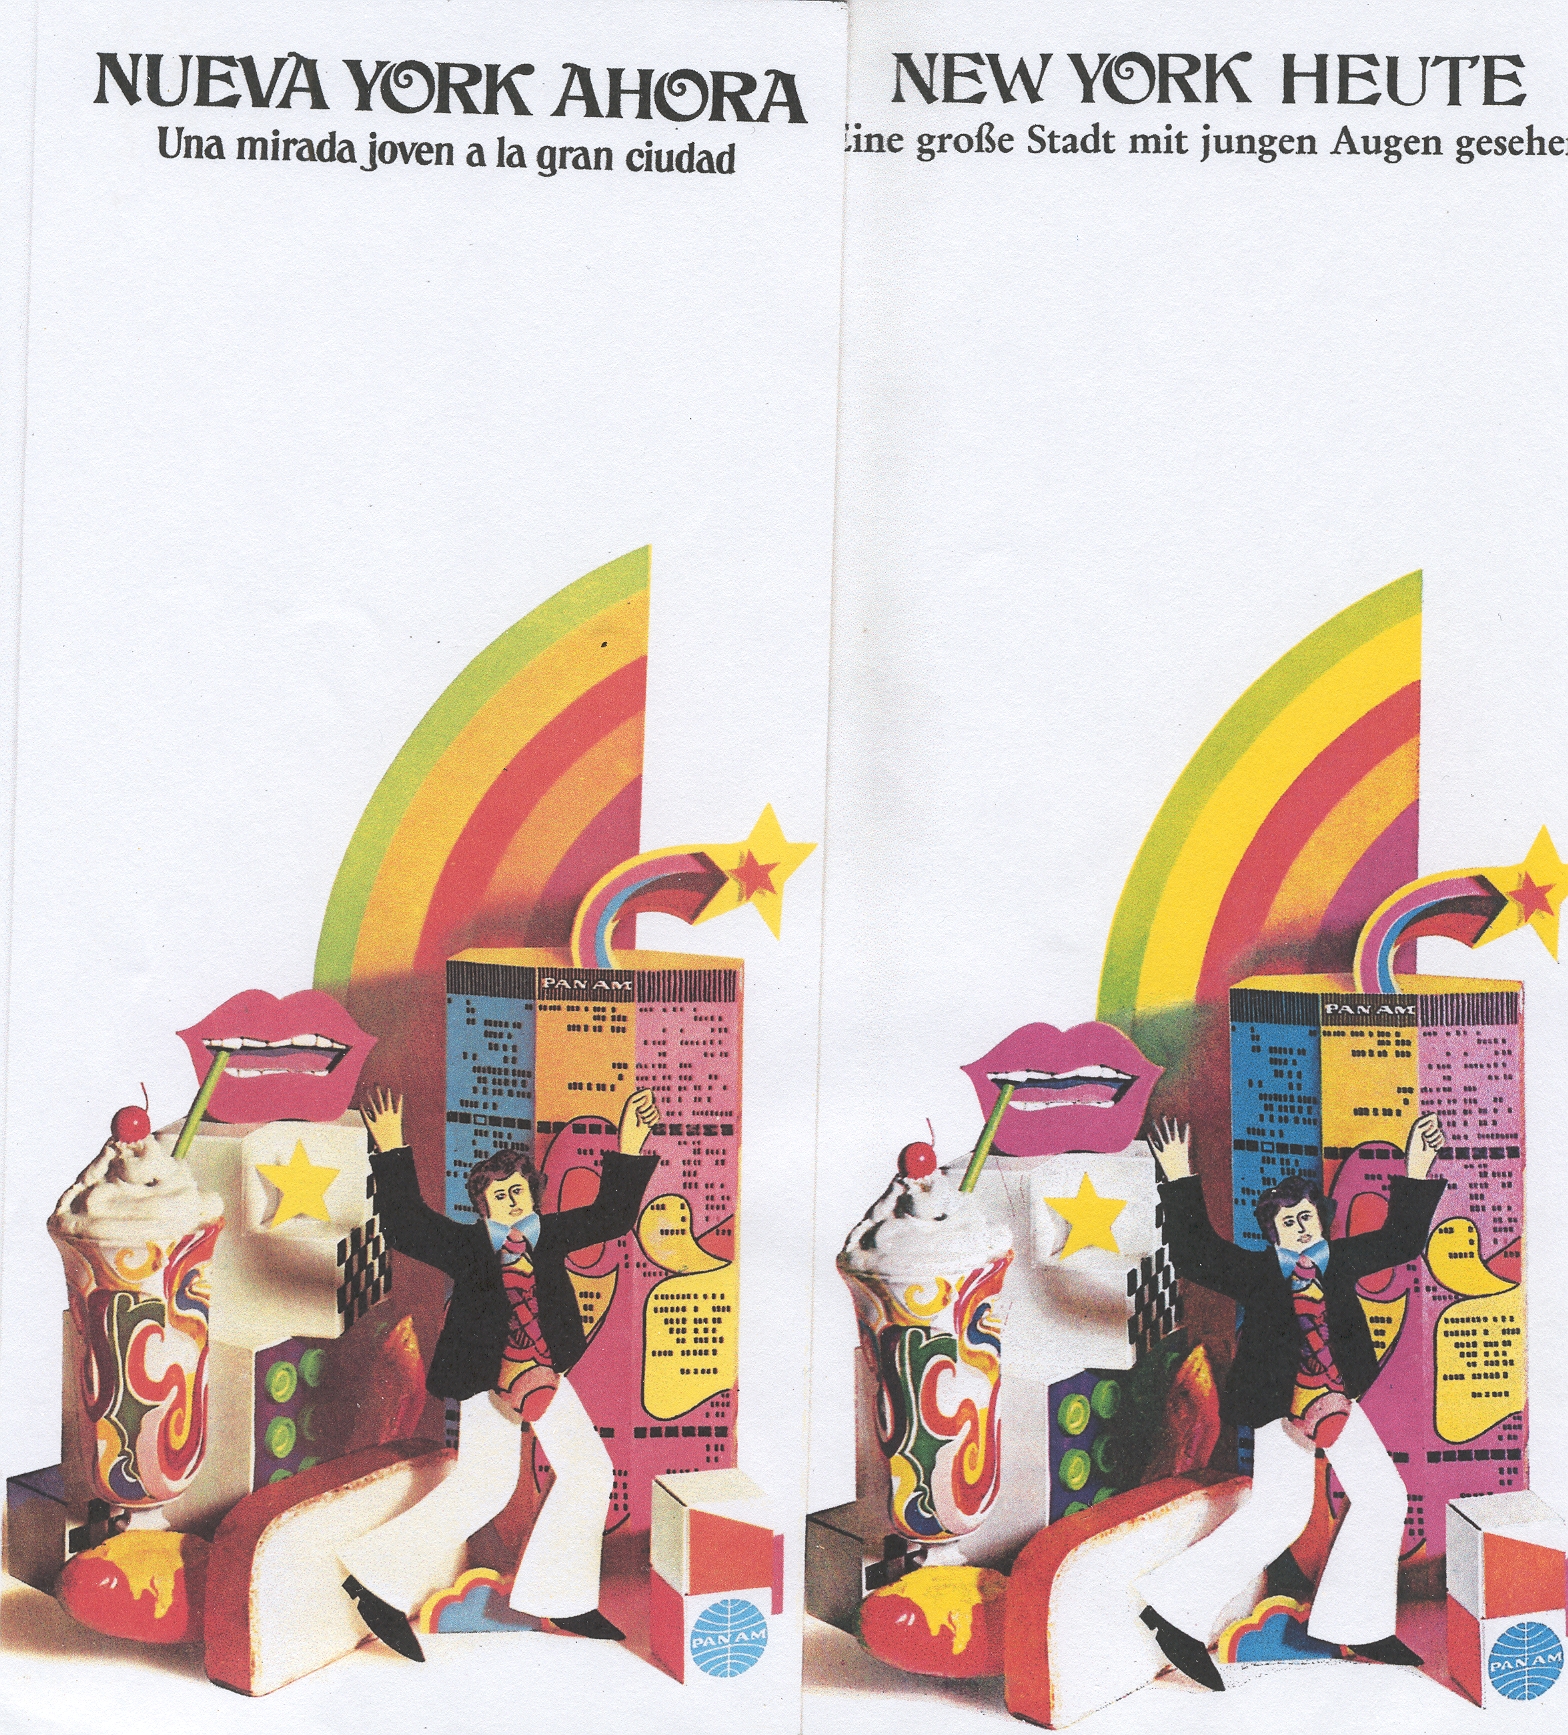 Sample brochure covers promoting New York in Spanish from the early 1970s